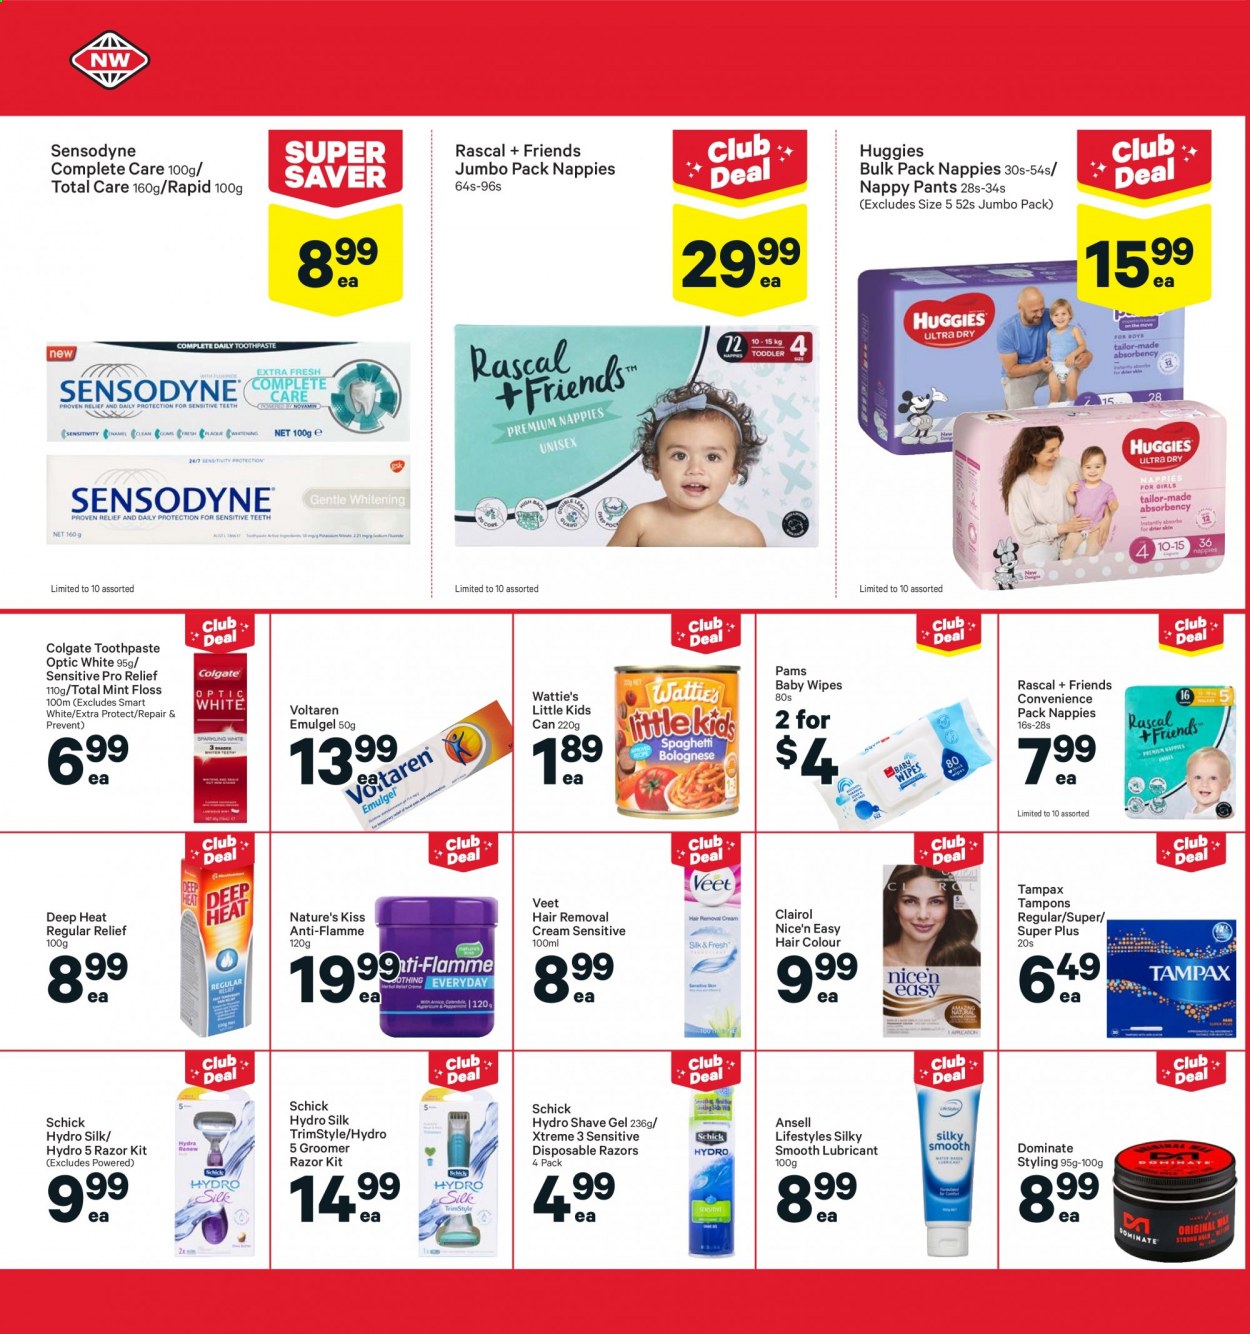 thumbnail - New World mailer - 23.08.2021 - 29.08.2021 - Sales products - Wattie's, Silk, wipes, Huggies, pants, baby wipes, nappies, Colgate, toothpaste, Sensodyne, Tampax, tampons, Clairol, hair color, razor, shave gel, Schick, hair removal, Veet, disposable razor. Page 24.